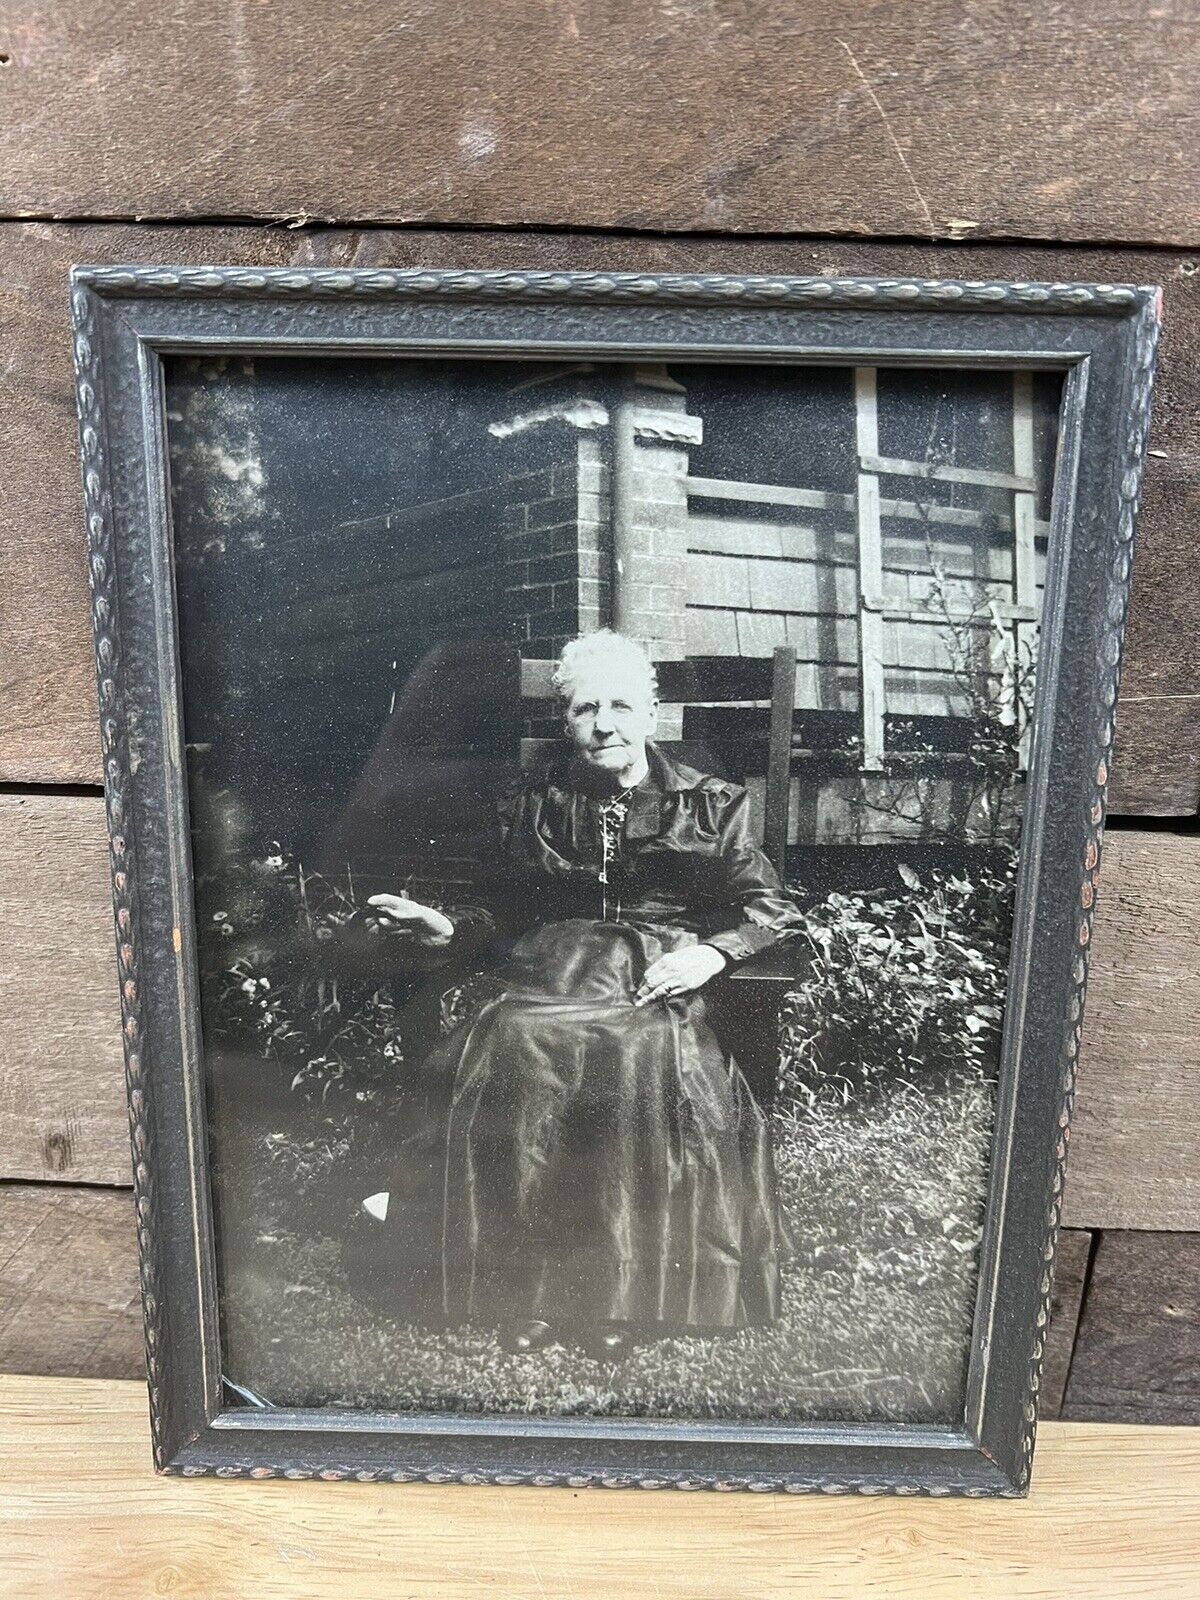 Antique Wood Frame Photo Of An Old Woman Sitting Outdoors